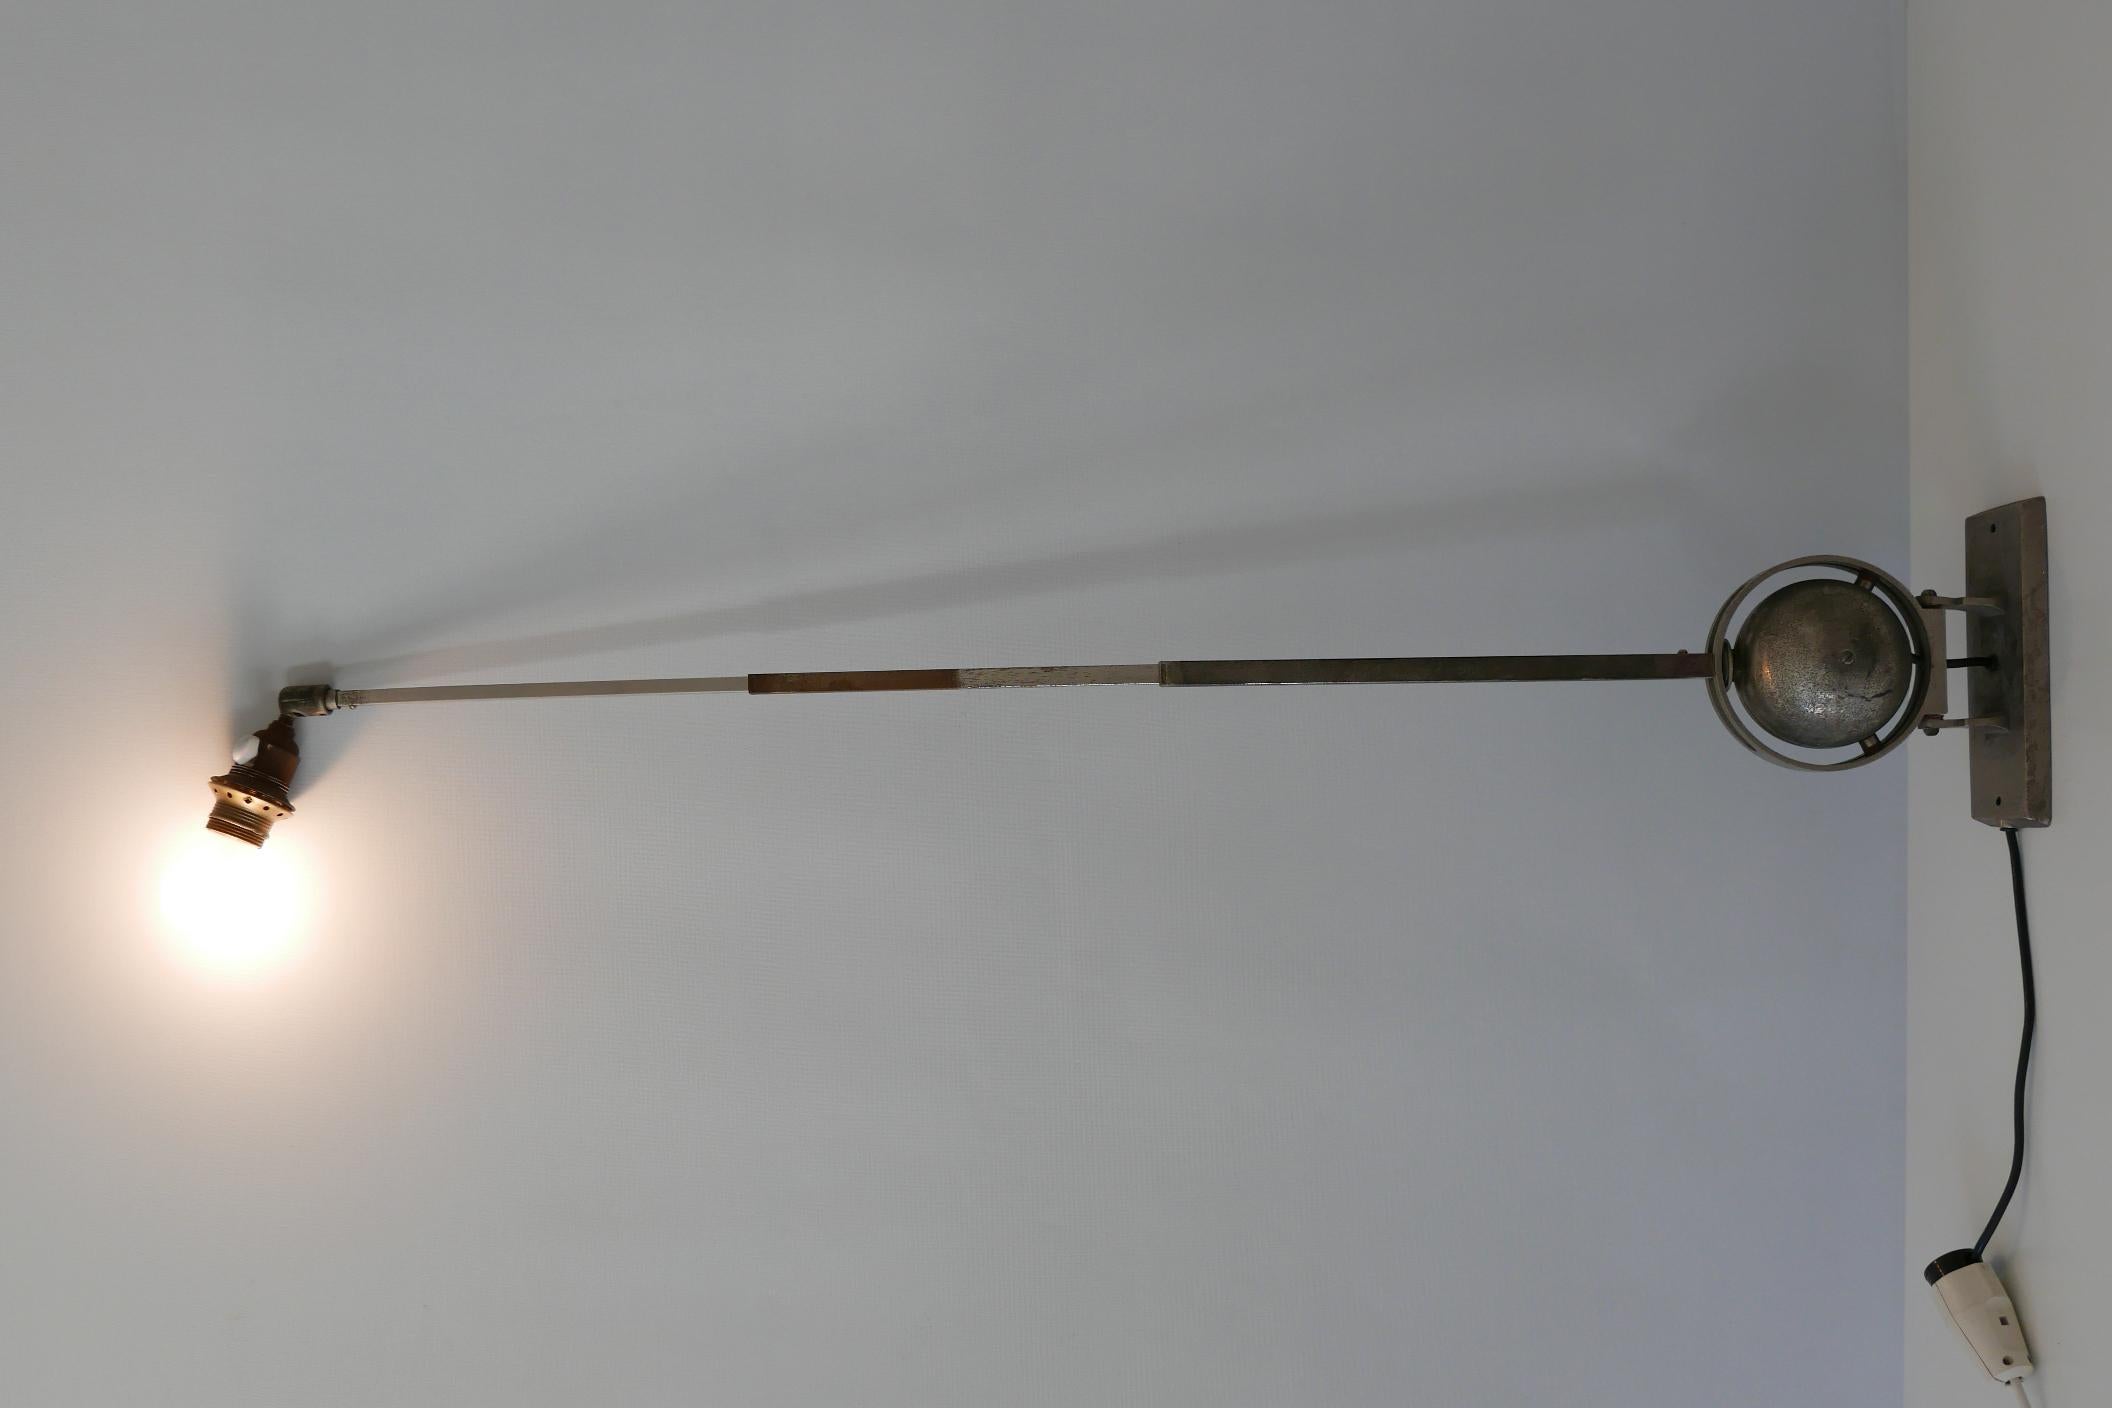 Extremely rare, articulated Bauhaus telescopic wall lamp. Adjustable in various position. Probably designed and manufactured in 1920s, Germany.

Executed in nickel-plated metal, the lamp comes with 1 x E27 / E26 Edison screw fit bulb holder. It is